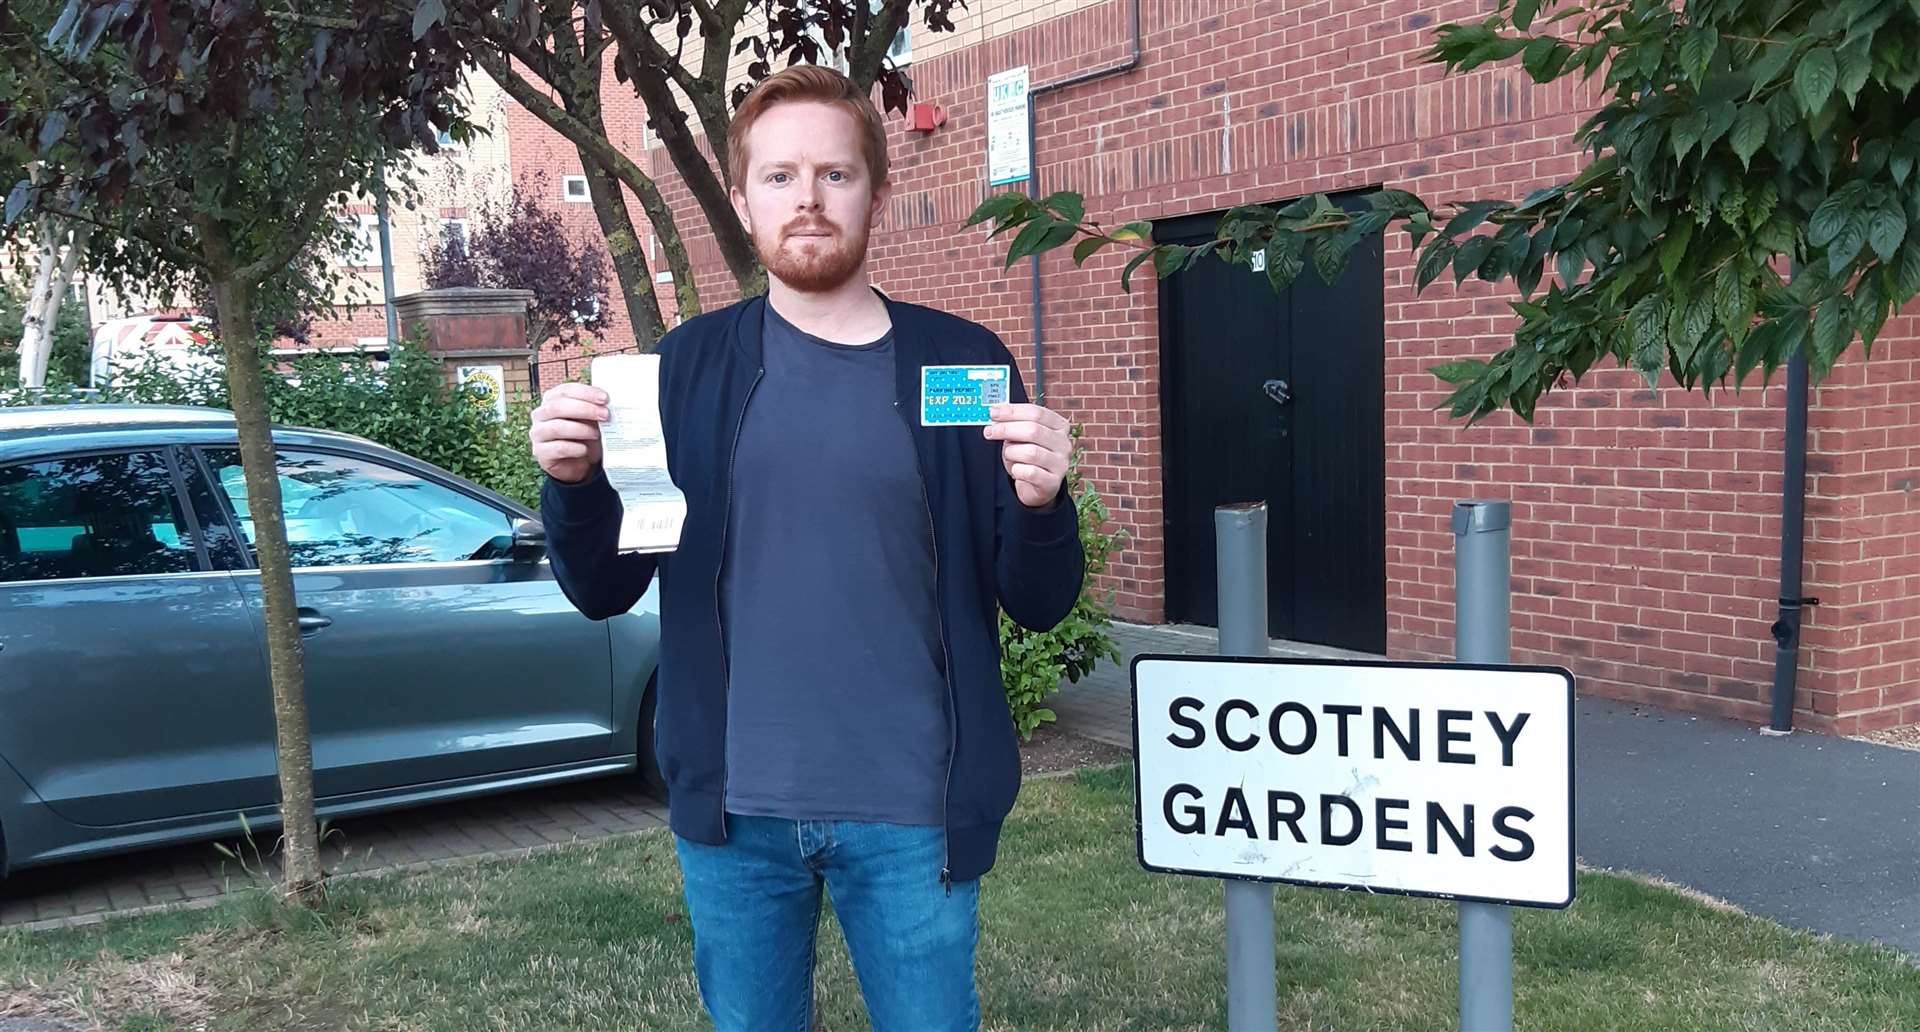 Mr Lawrence Puckett, 31, holding his valid permit and the £100 parking fine. Picture: Lawrence Puckett